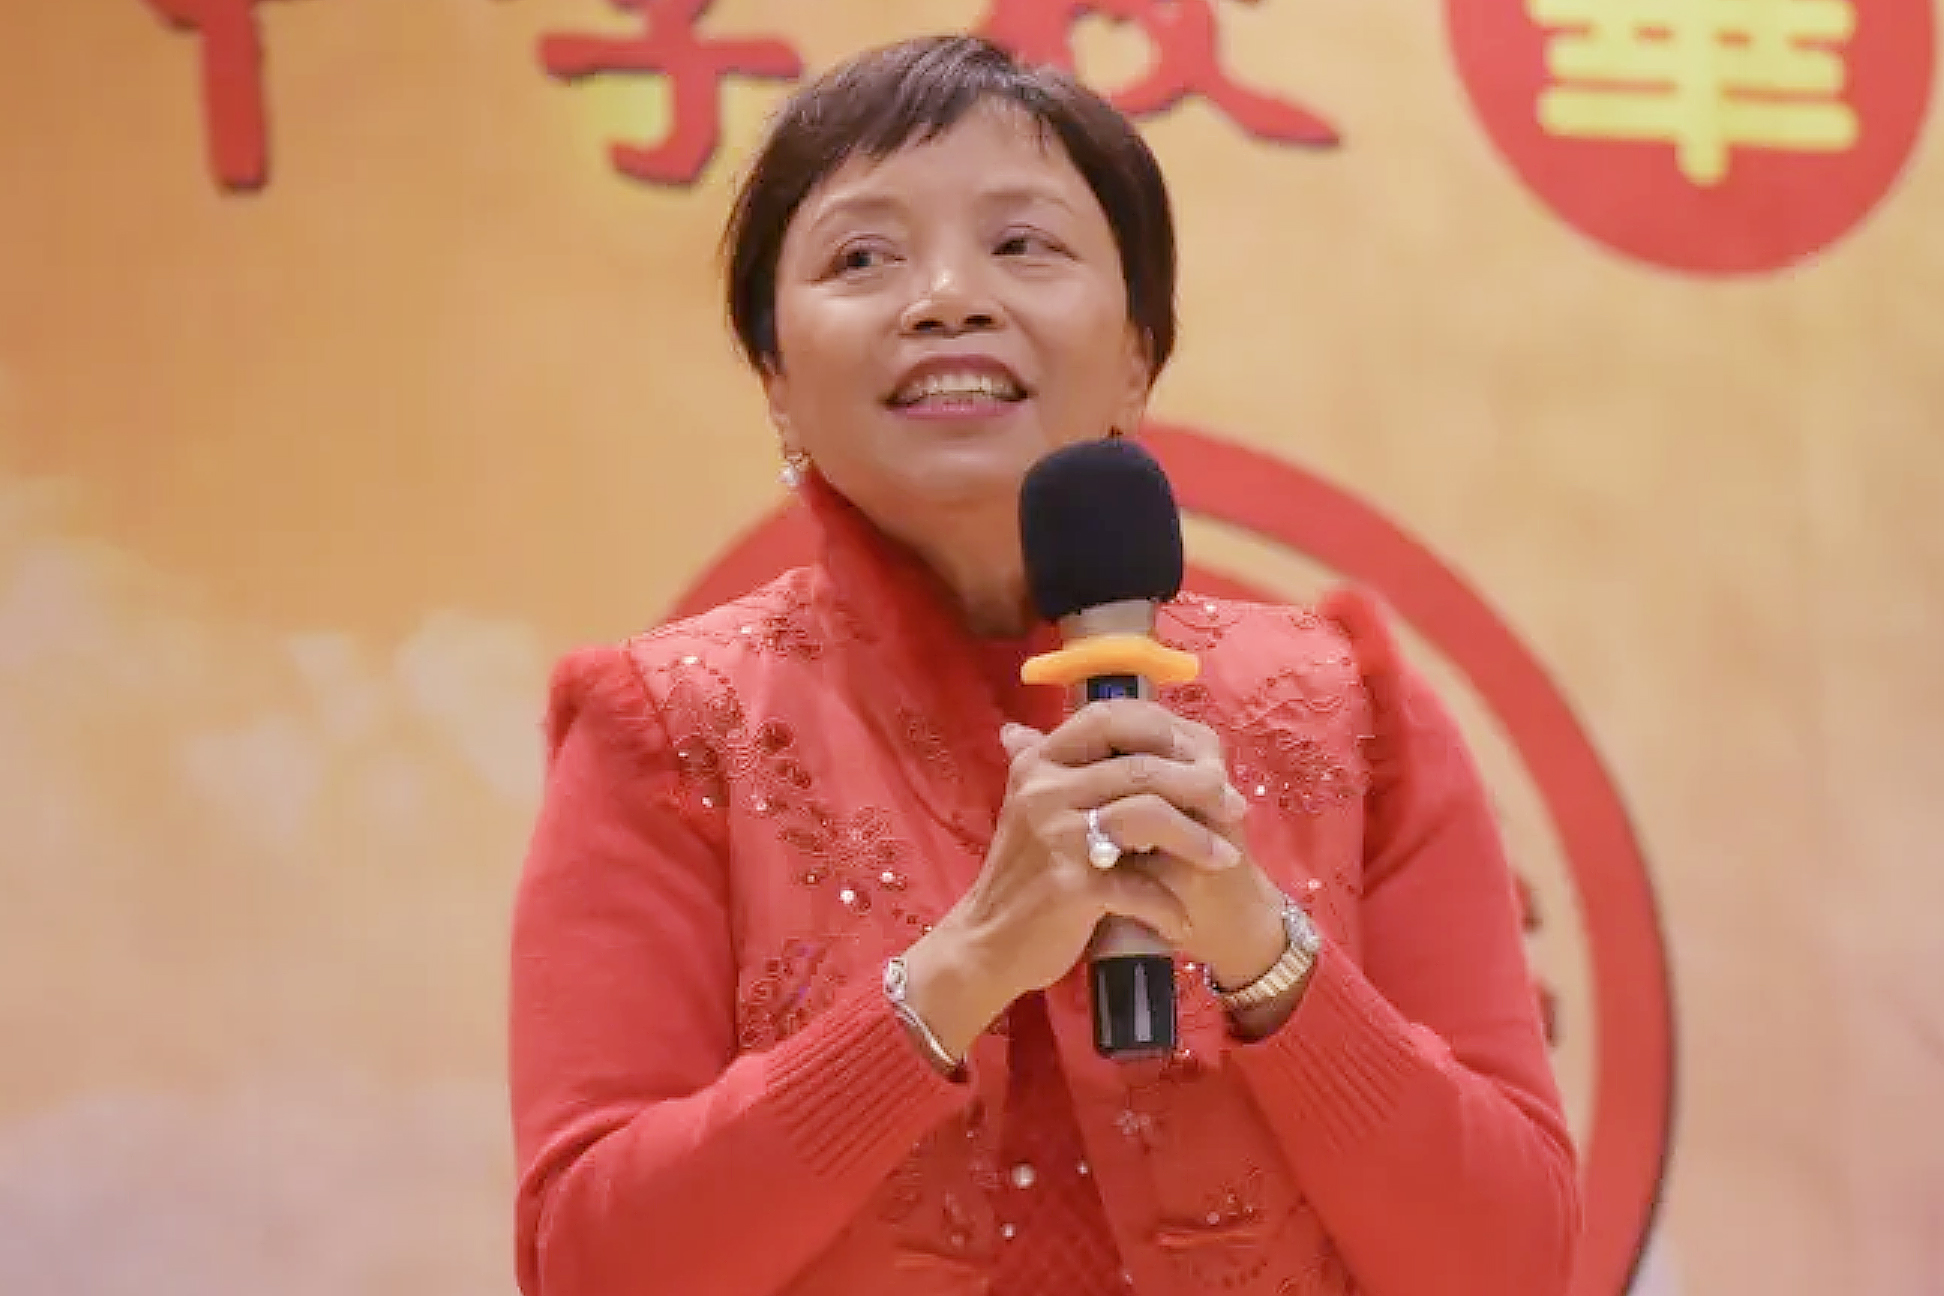 A woman in a red shirt holds a microphone.